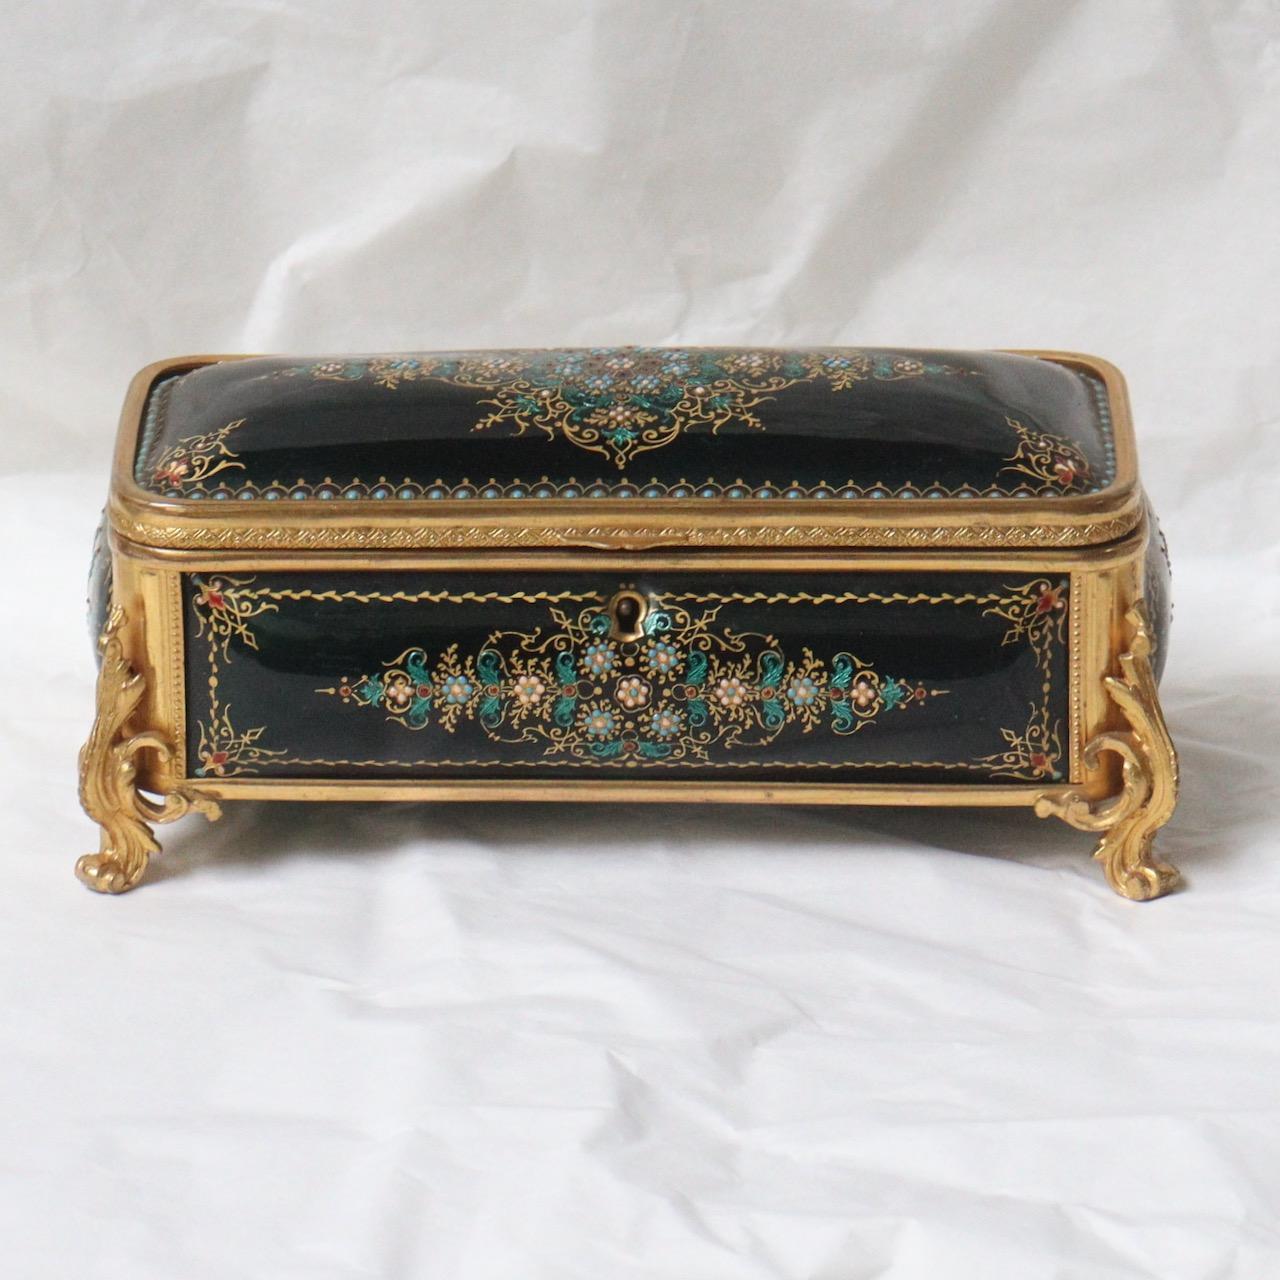 A French Napoléon III rectangular shape jewelry casket
With gilded bronzes and five hand-painted curved enamel plaques in gold and green on gold paillon, on a black emerald green background, decorated with reserves with white fleurons and lozenges,